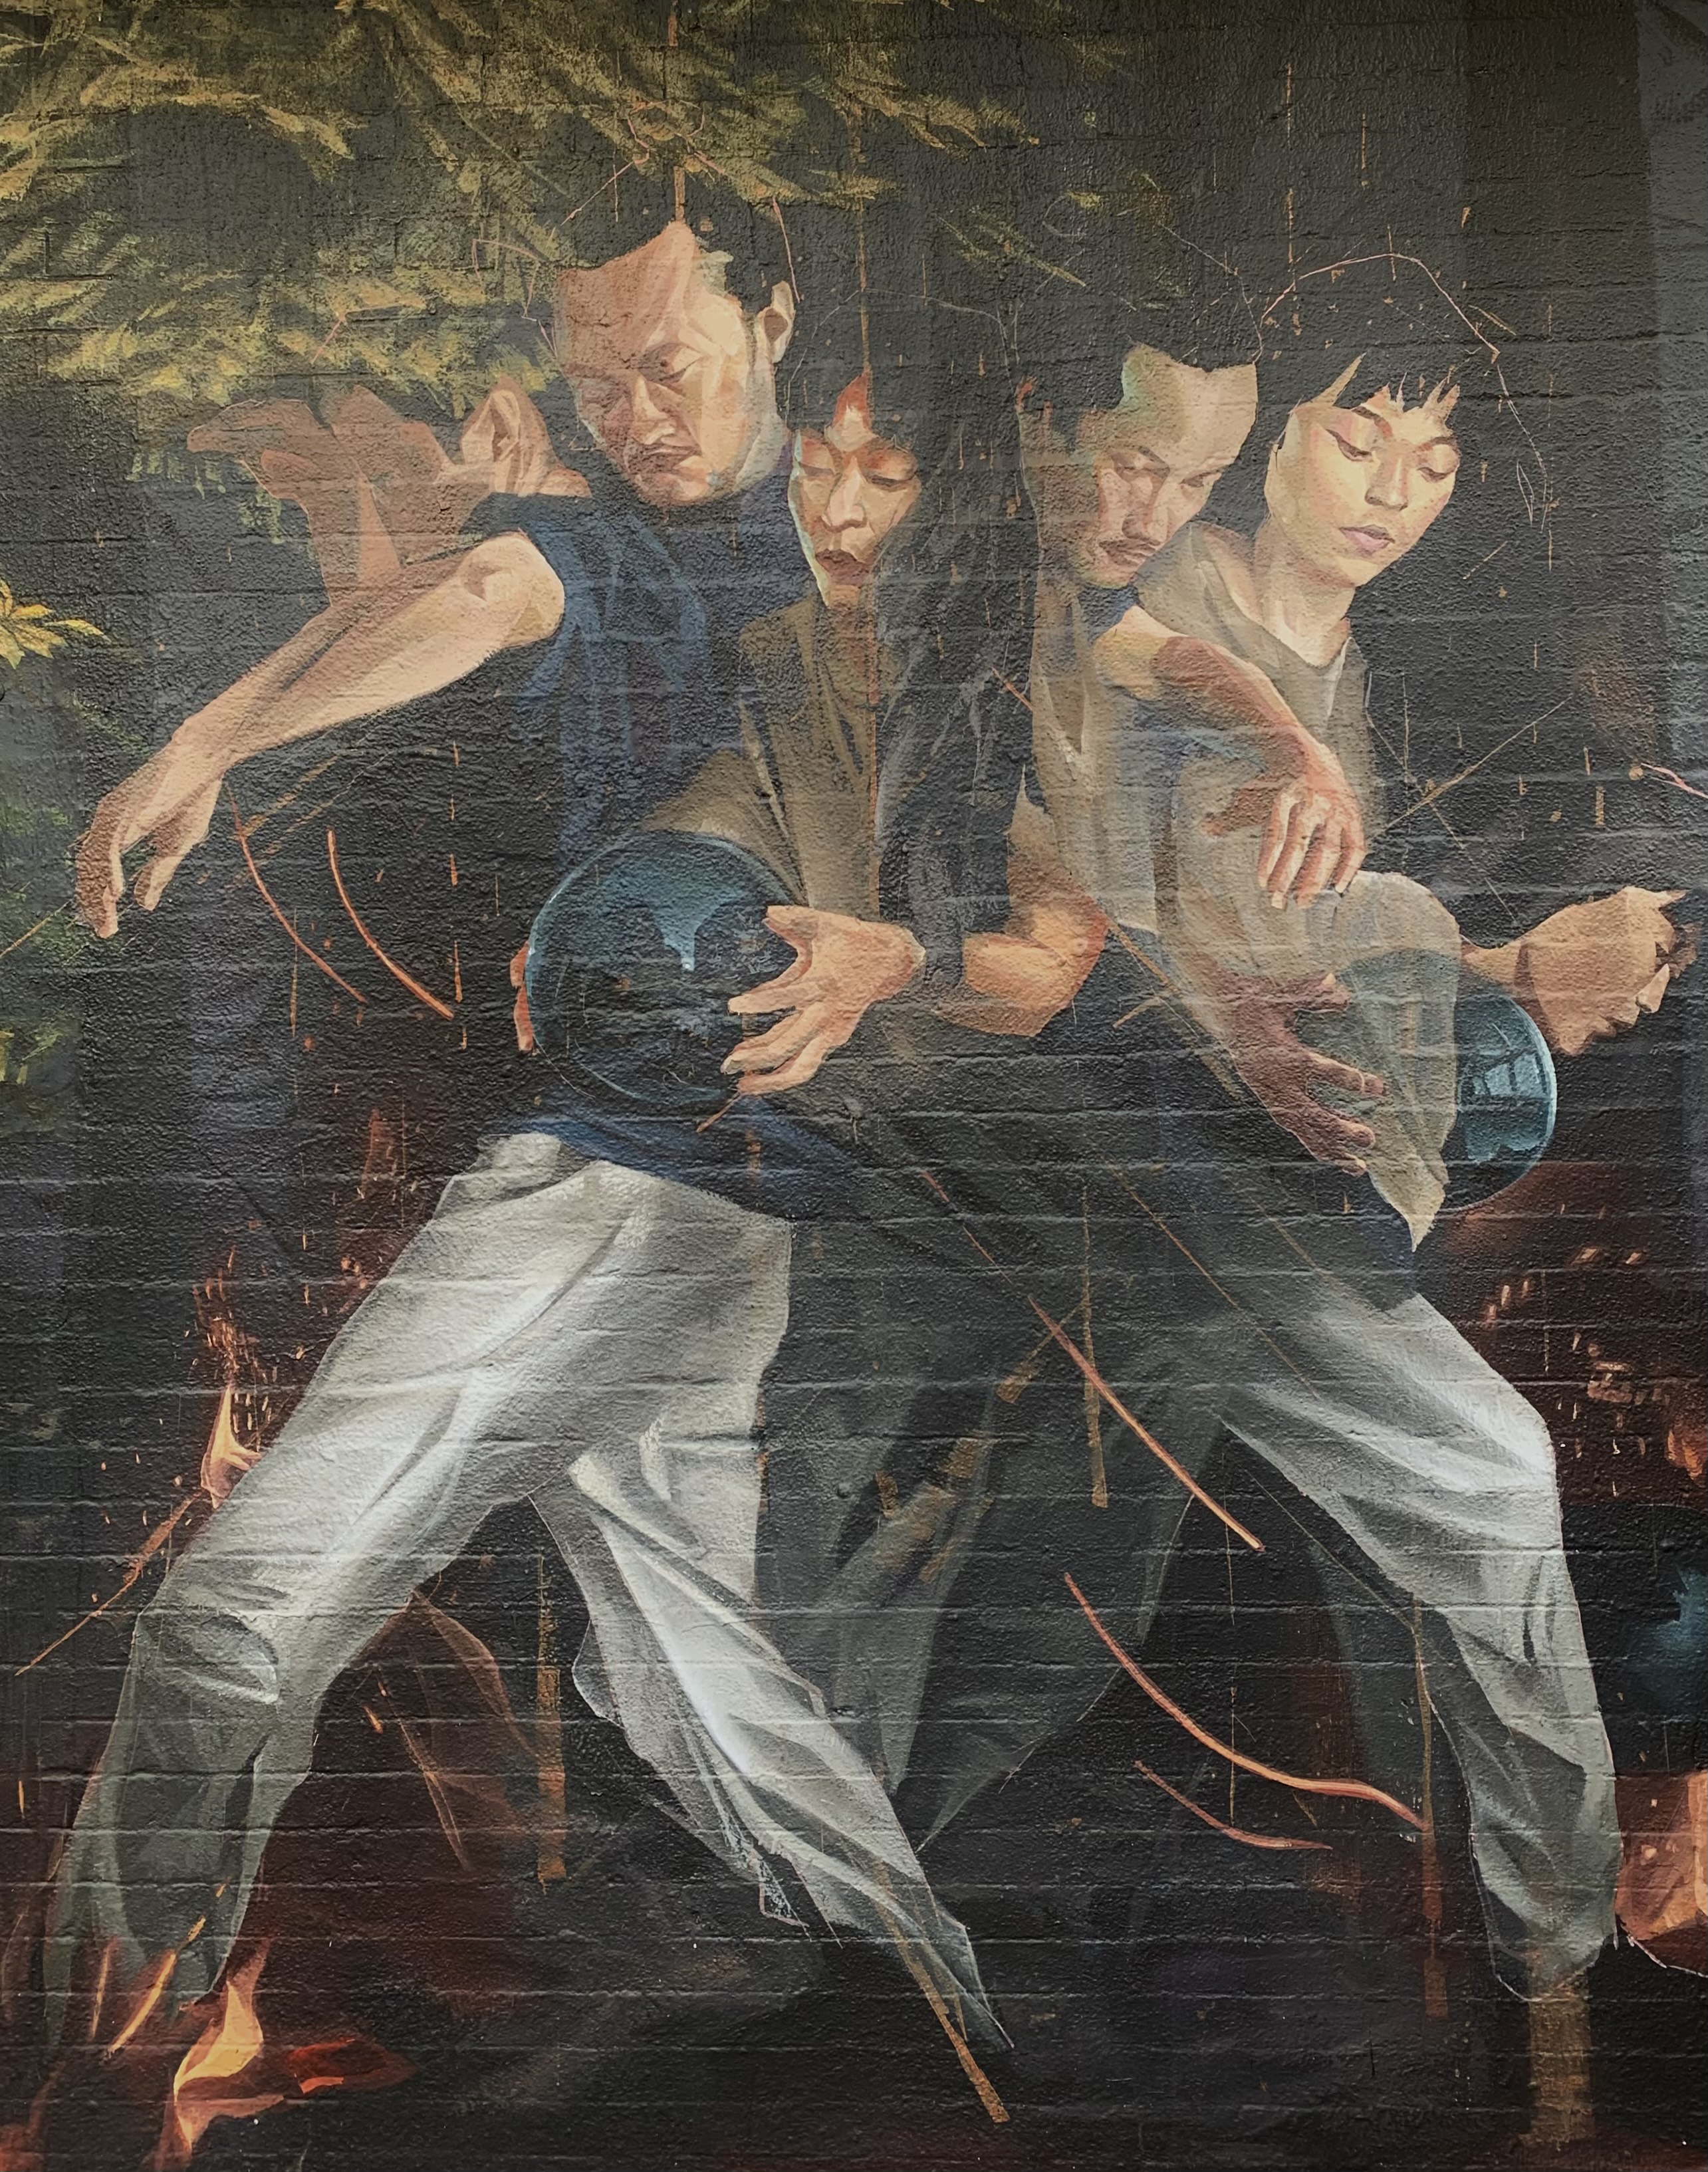 A mural of four figures handling a reflective ball painted on a brink wall